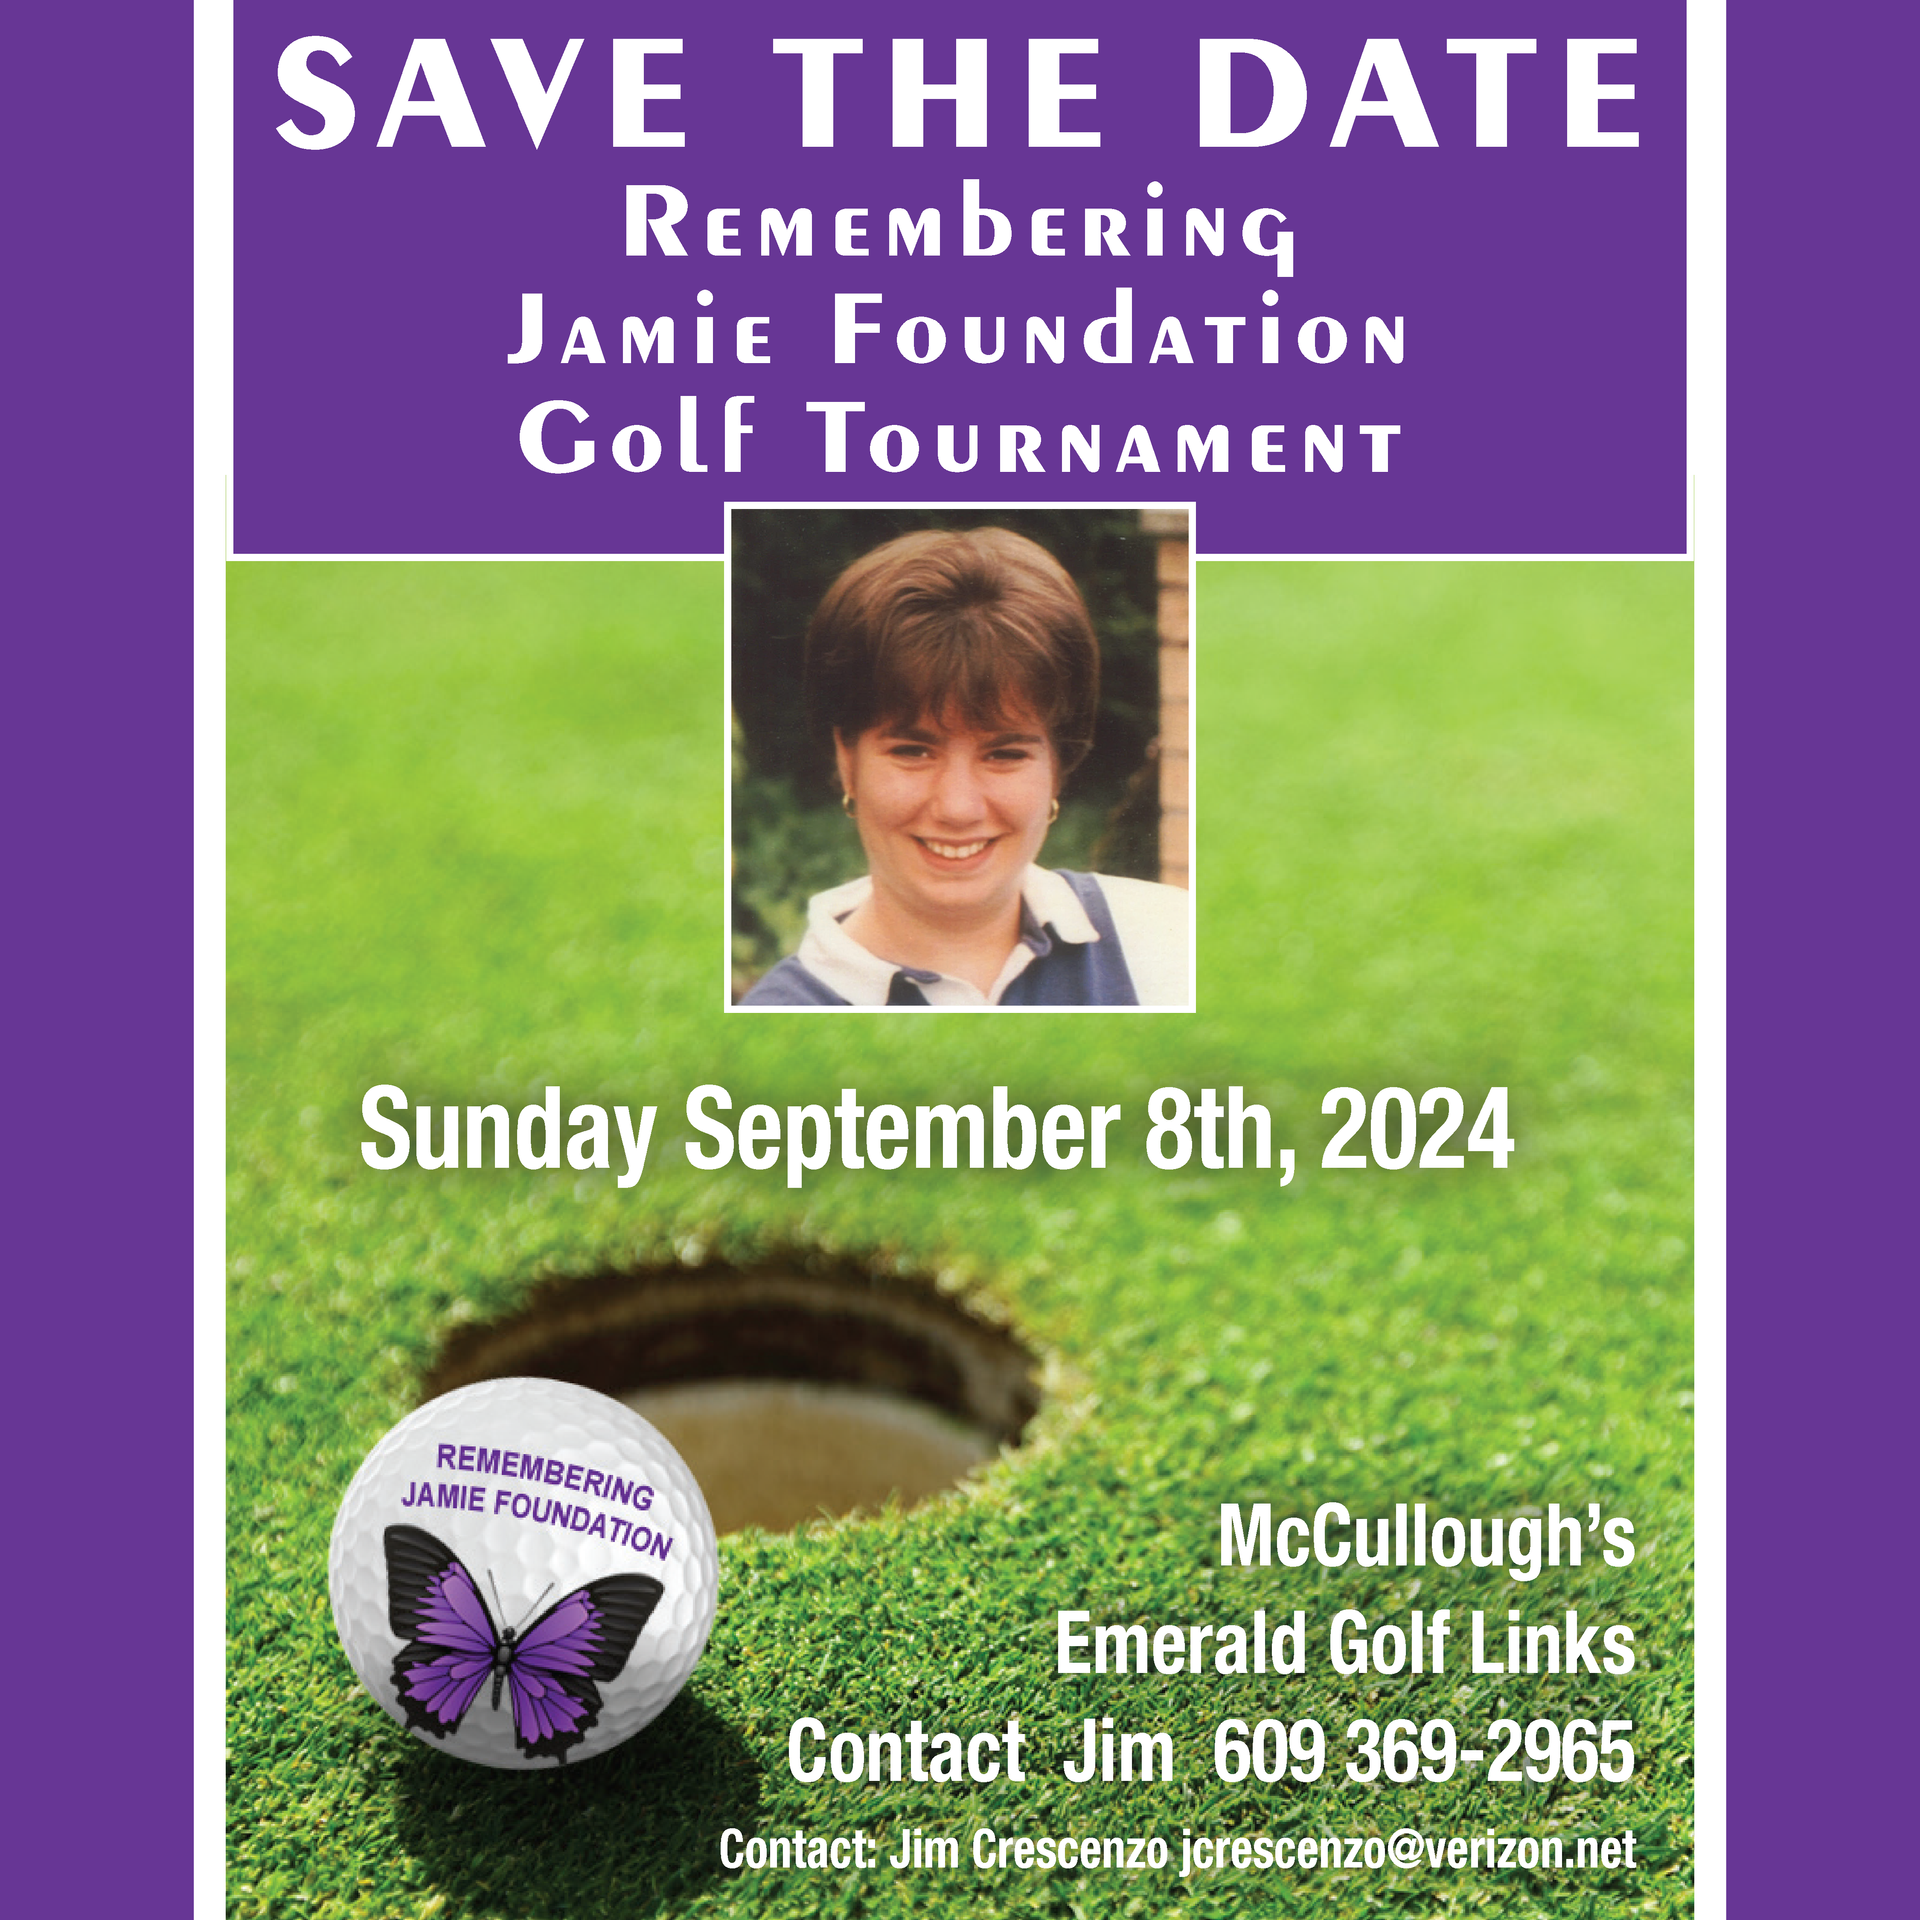 a save the date poster for the jamie foundation golf tournament